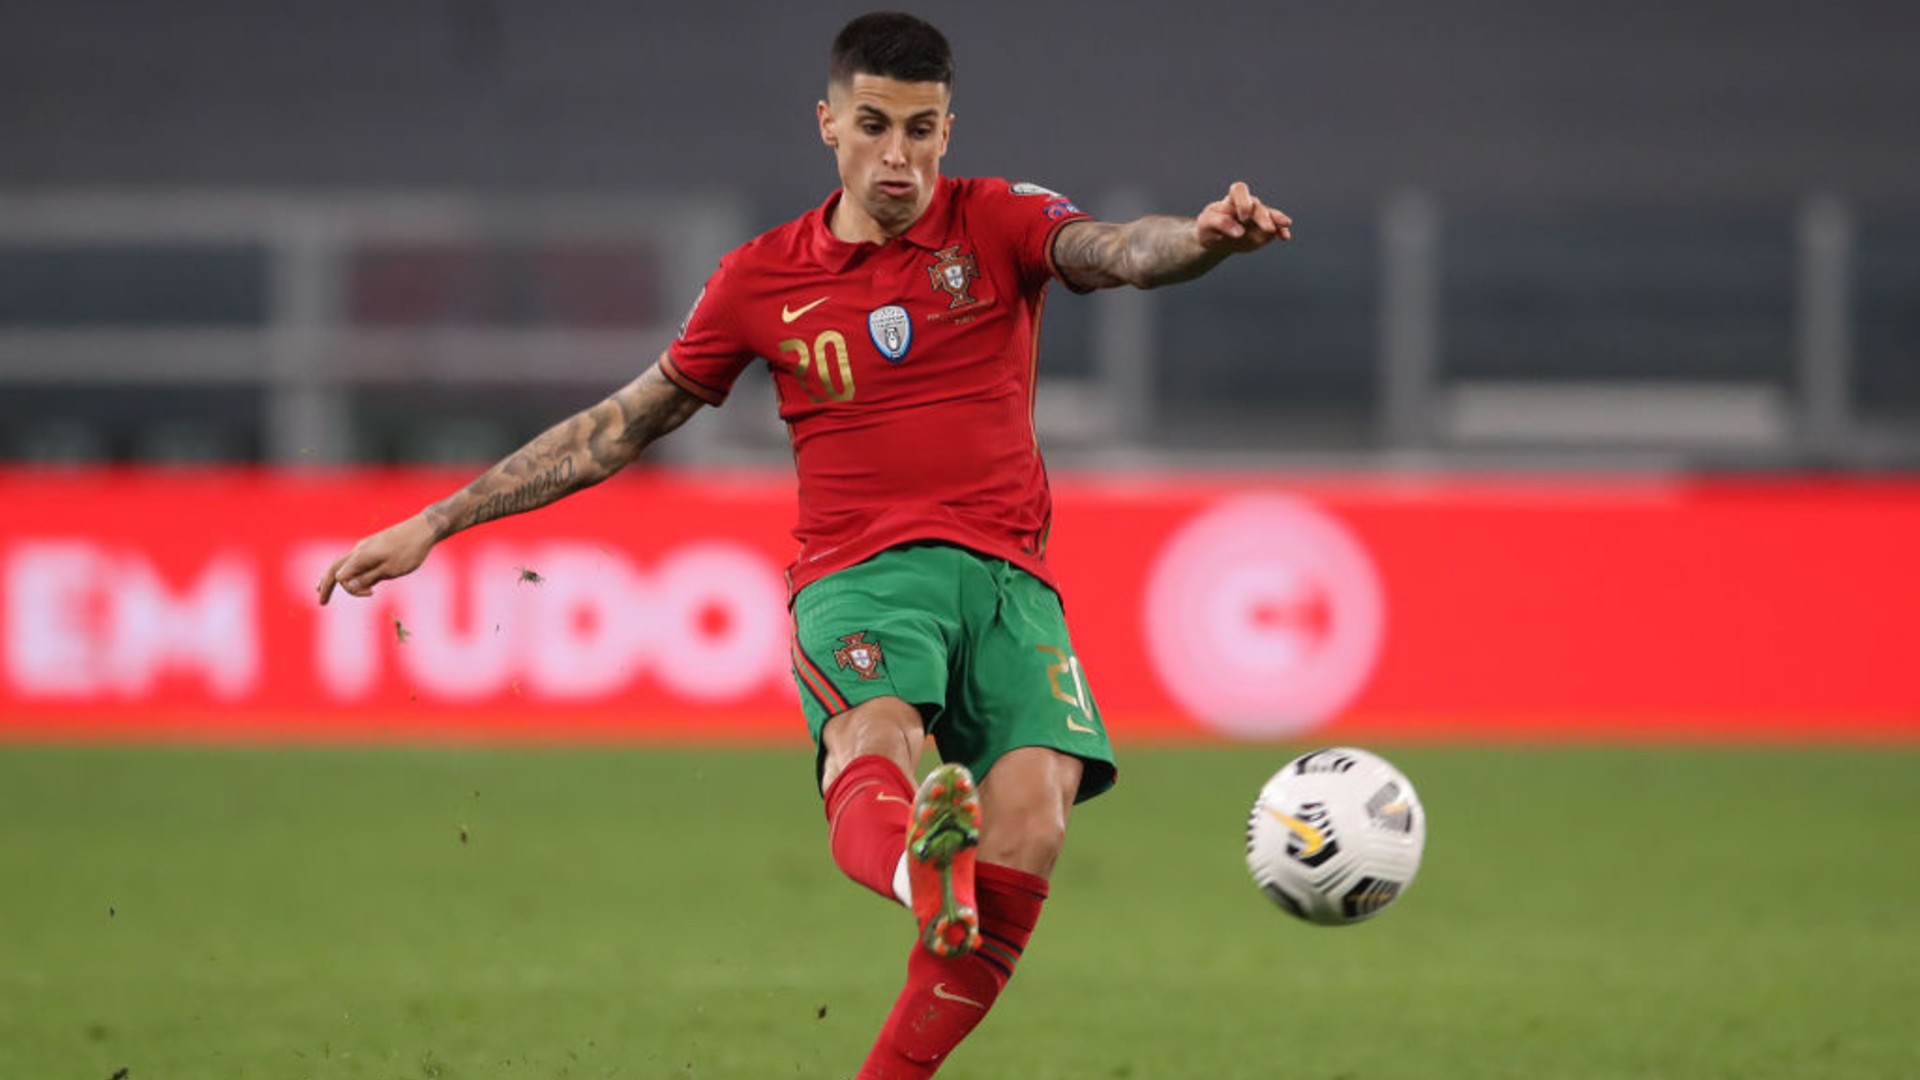 Cancelo scores as City trio help Portugal to Euro 2020 warmup win